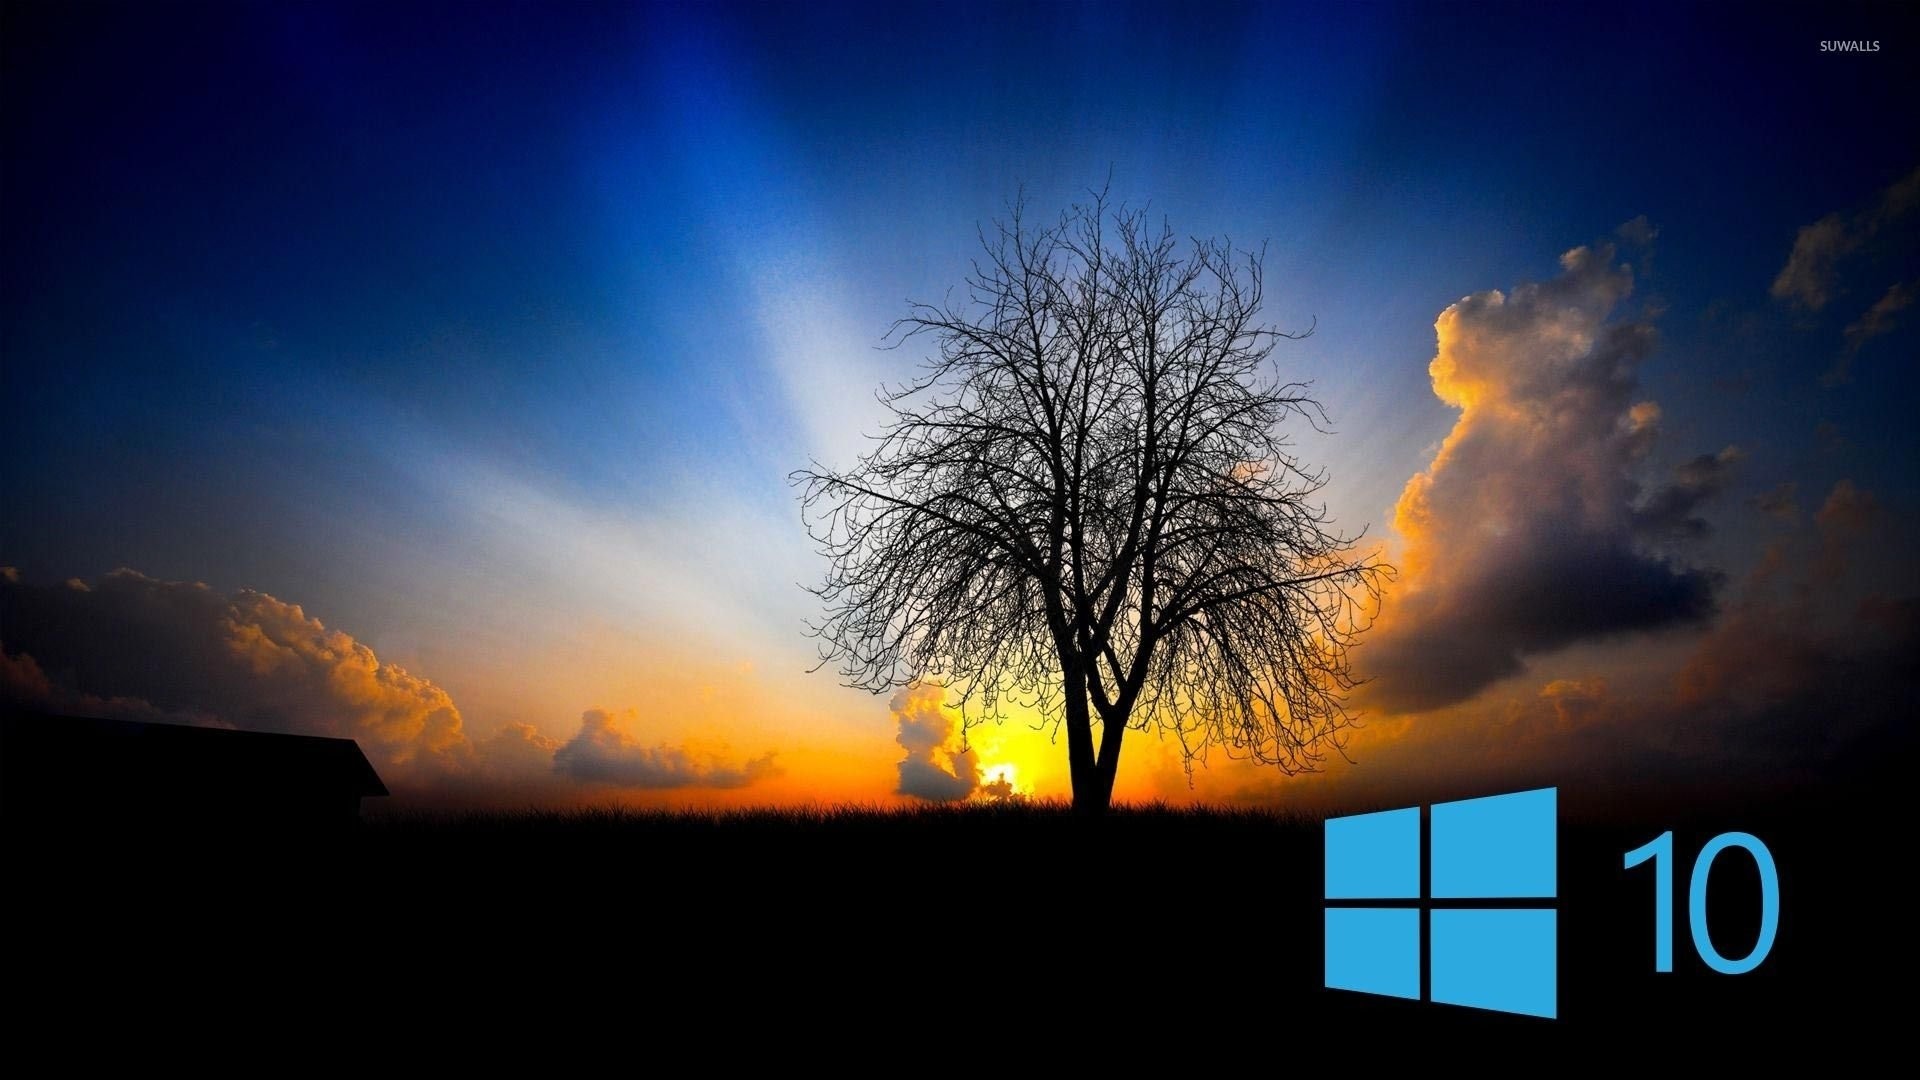 Cool Windows 10 Wallpapers Wallpaper Cave Throughout - Background Windows  10 Wallpaper Hd - 1920x1080 Wallpaper 